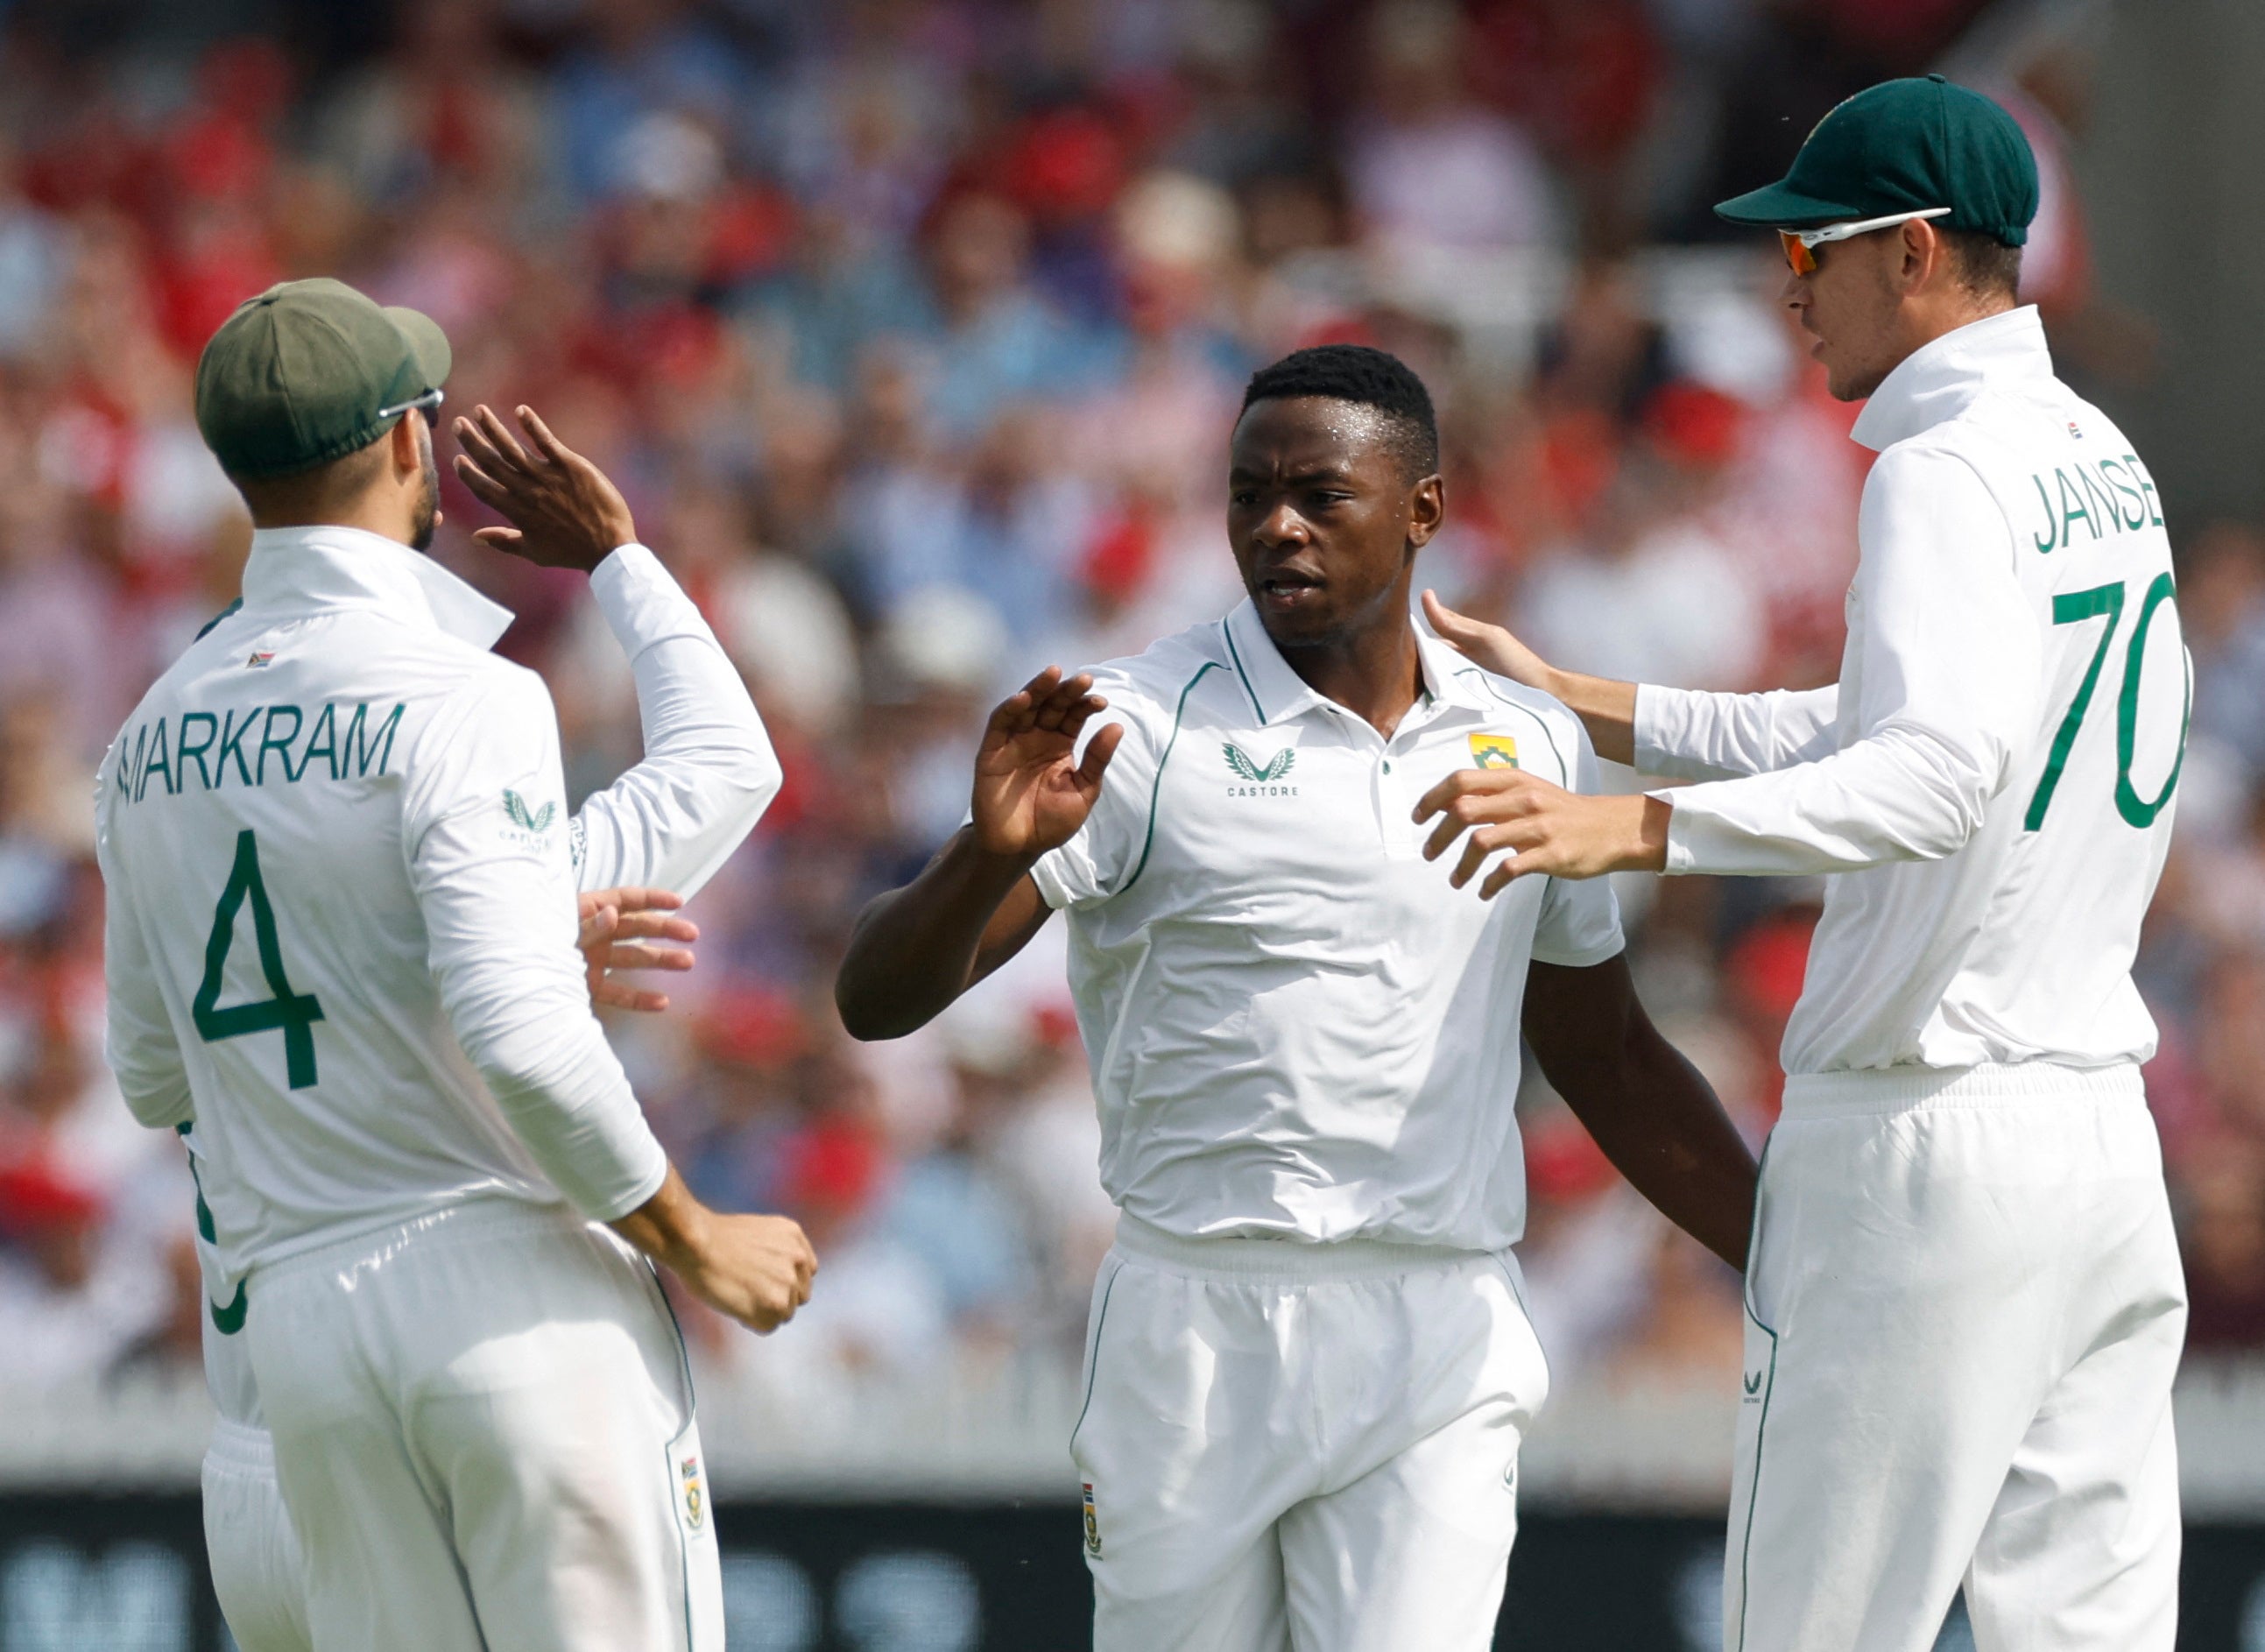 Rabada cleaned the hosts up on the second morning at Lord’s